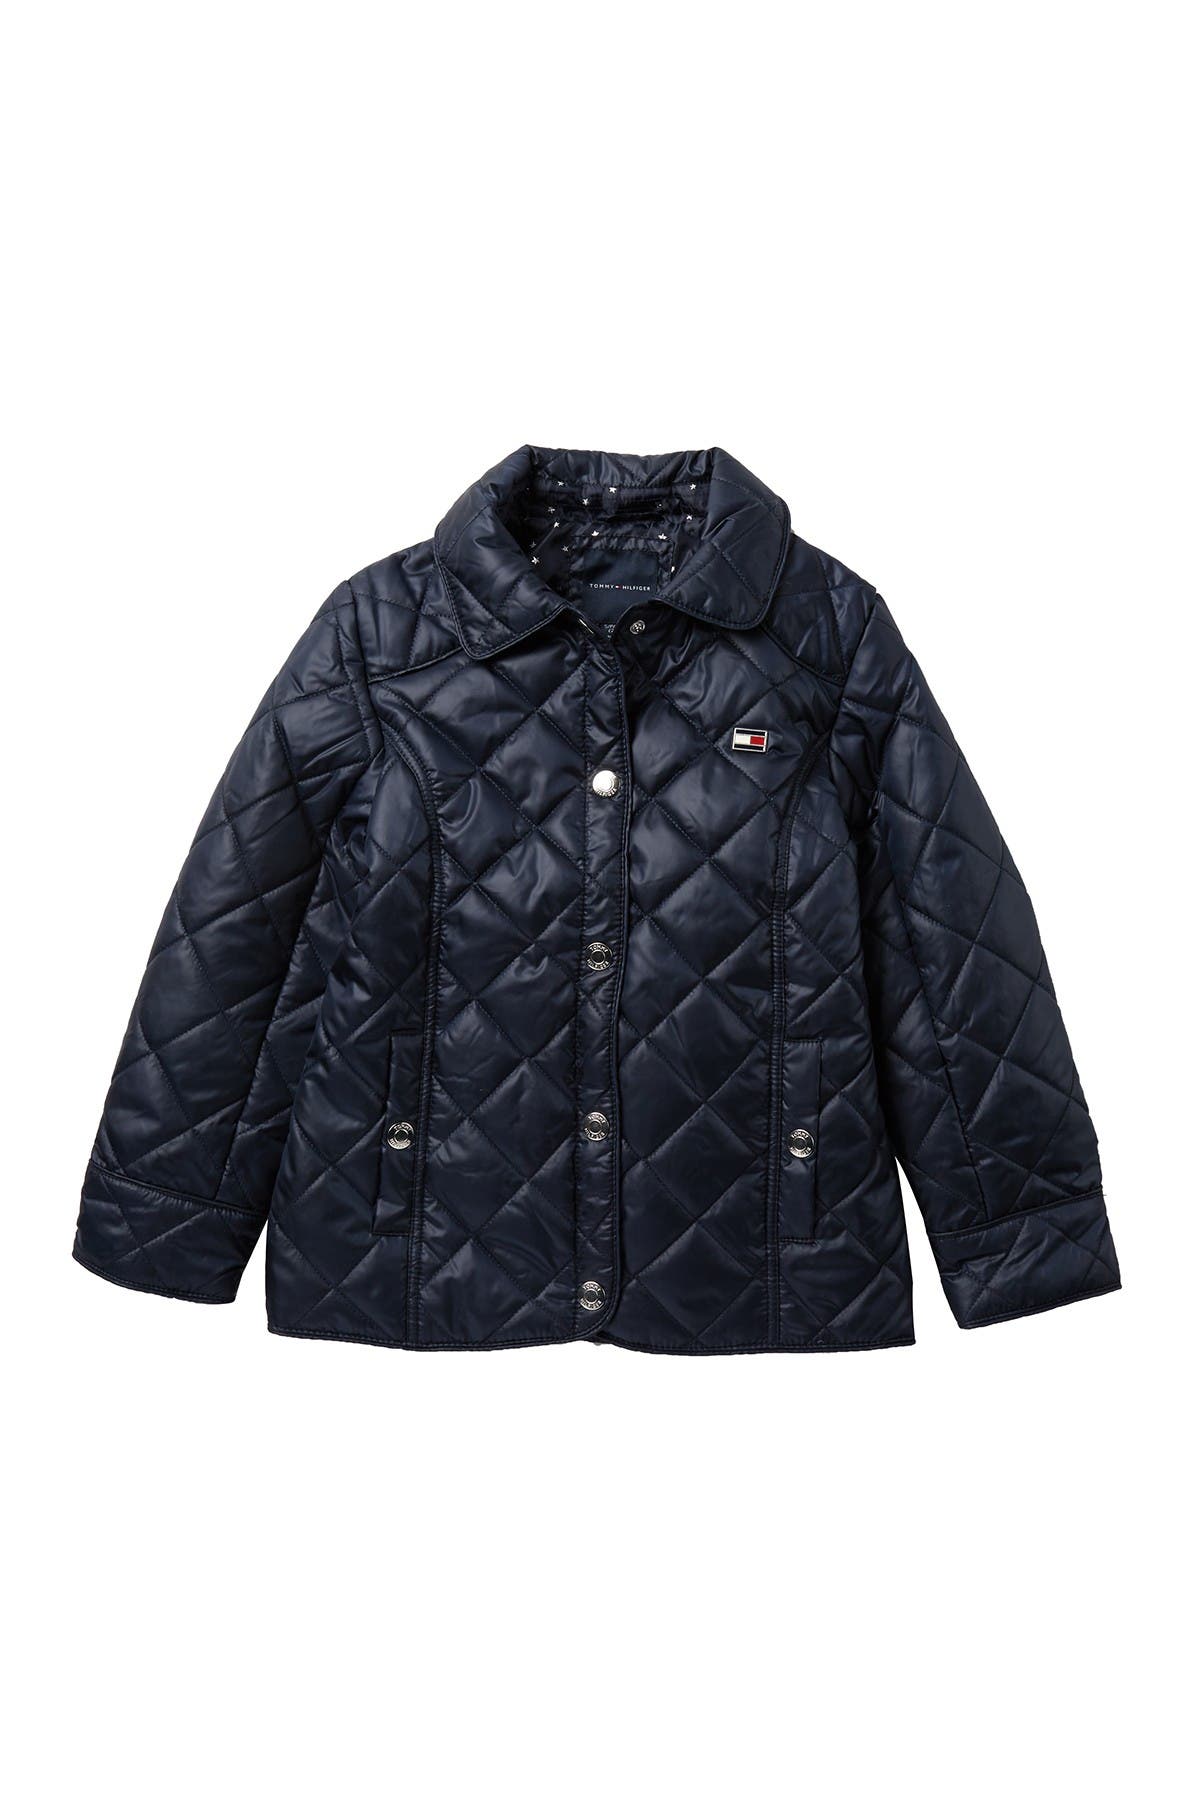 tommy hilfiger quilted barn jacket